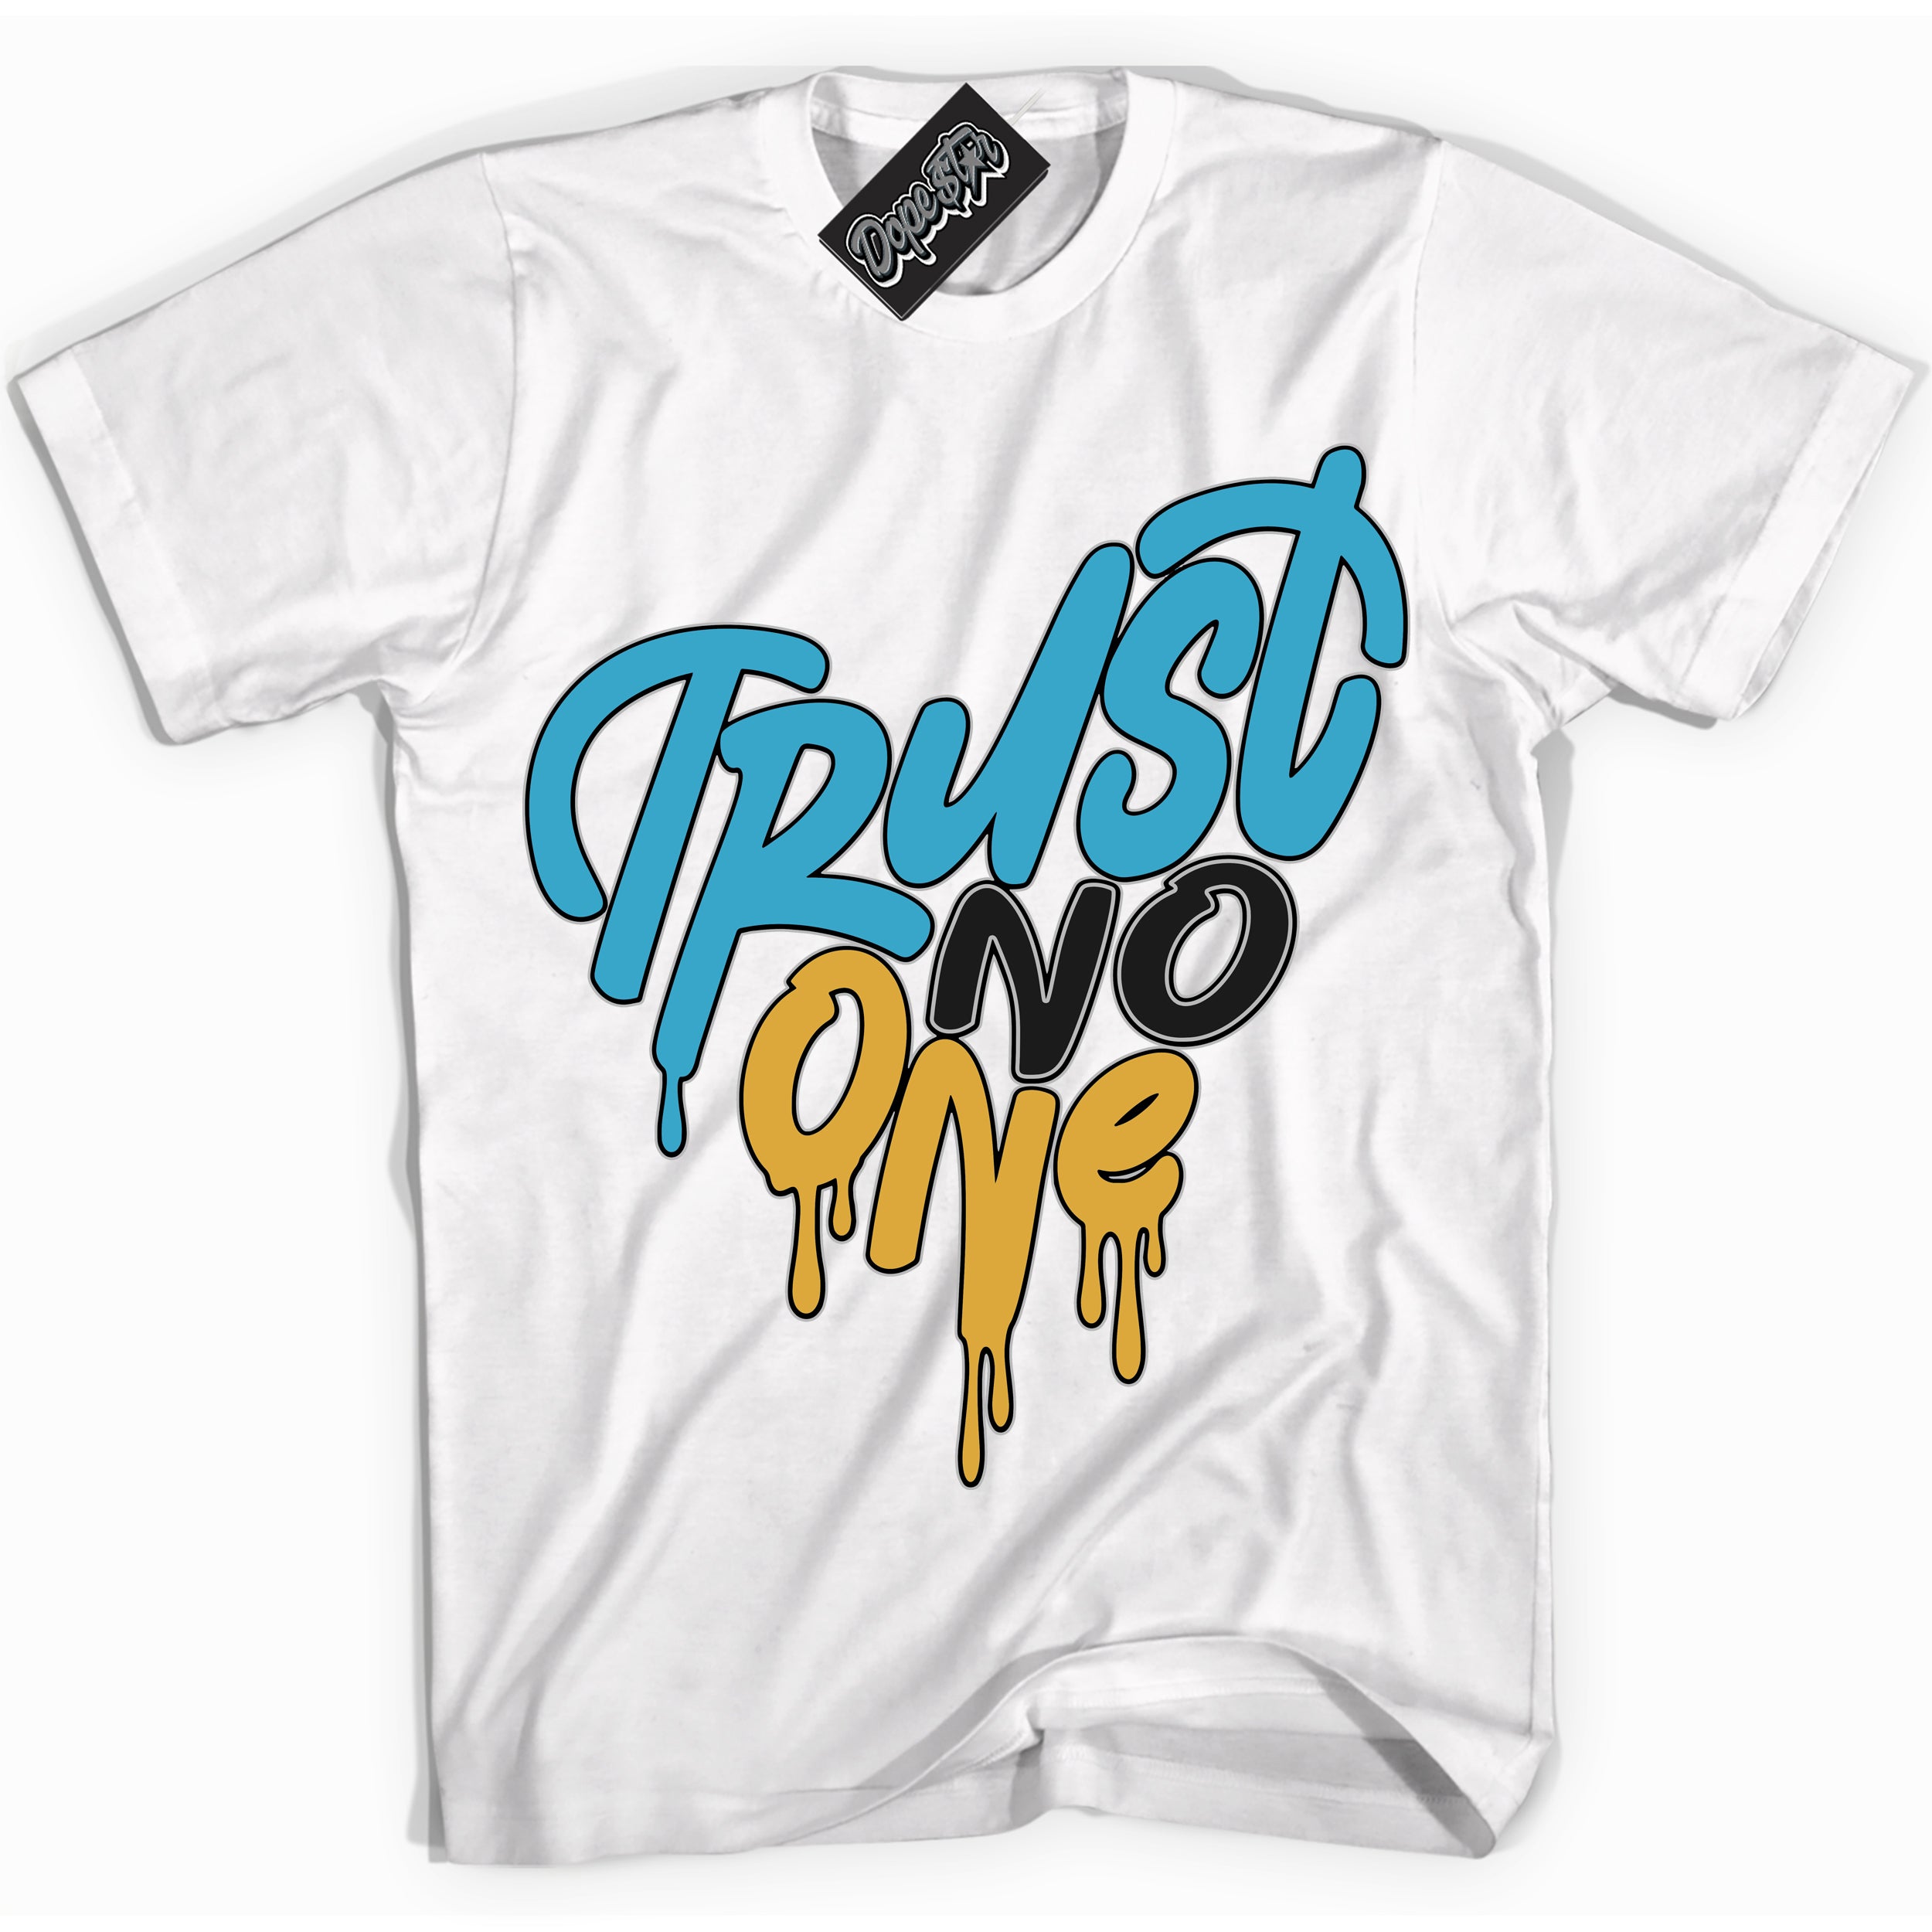 Cool White Shirt with “ Trust No One Heart” design that perfectly matches Aqua 5s Sneakers.